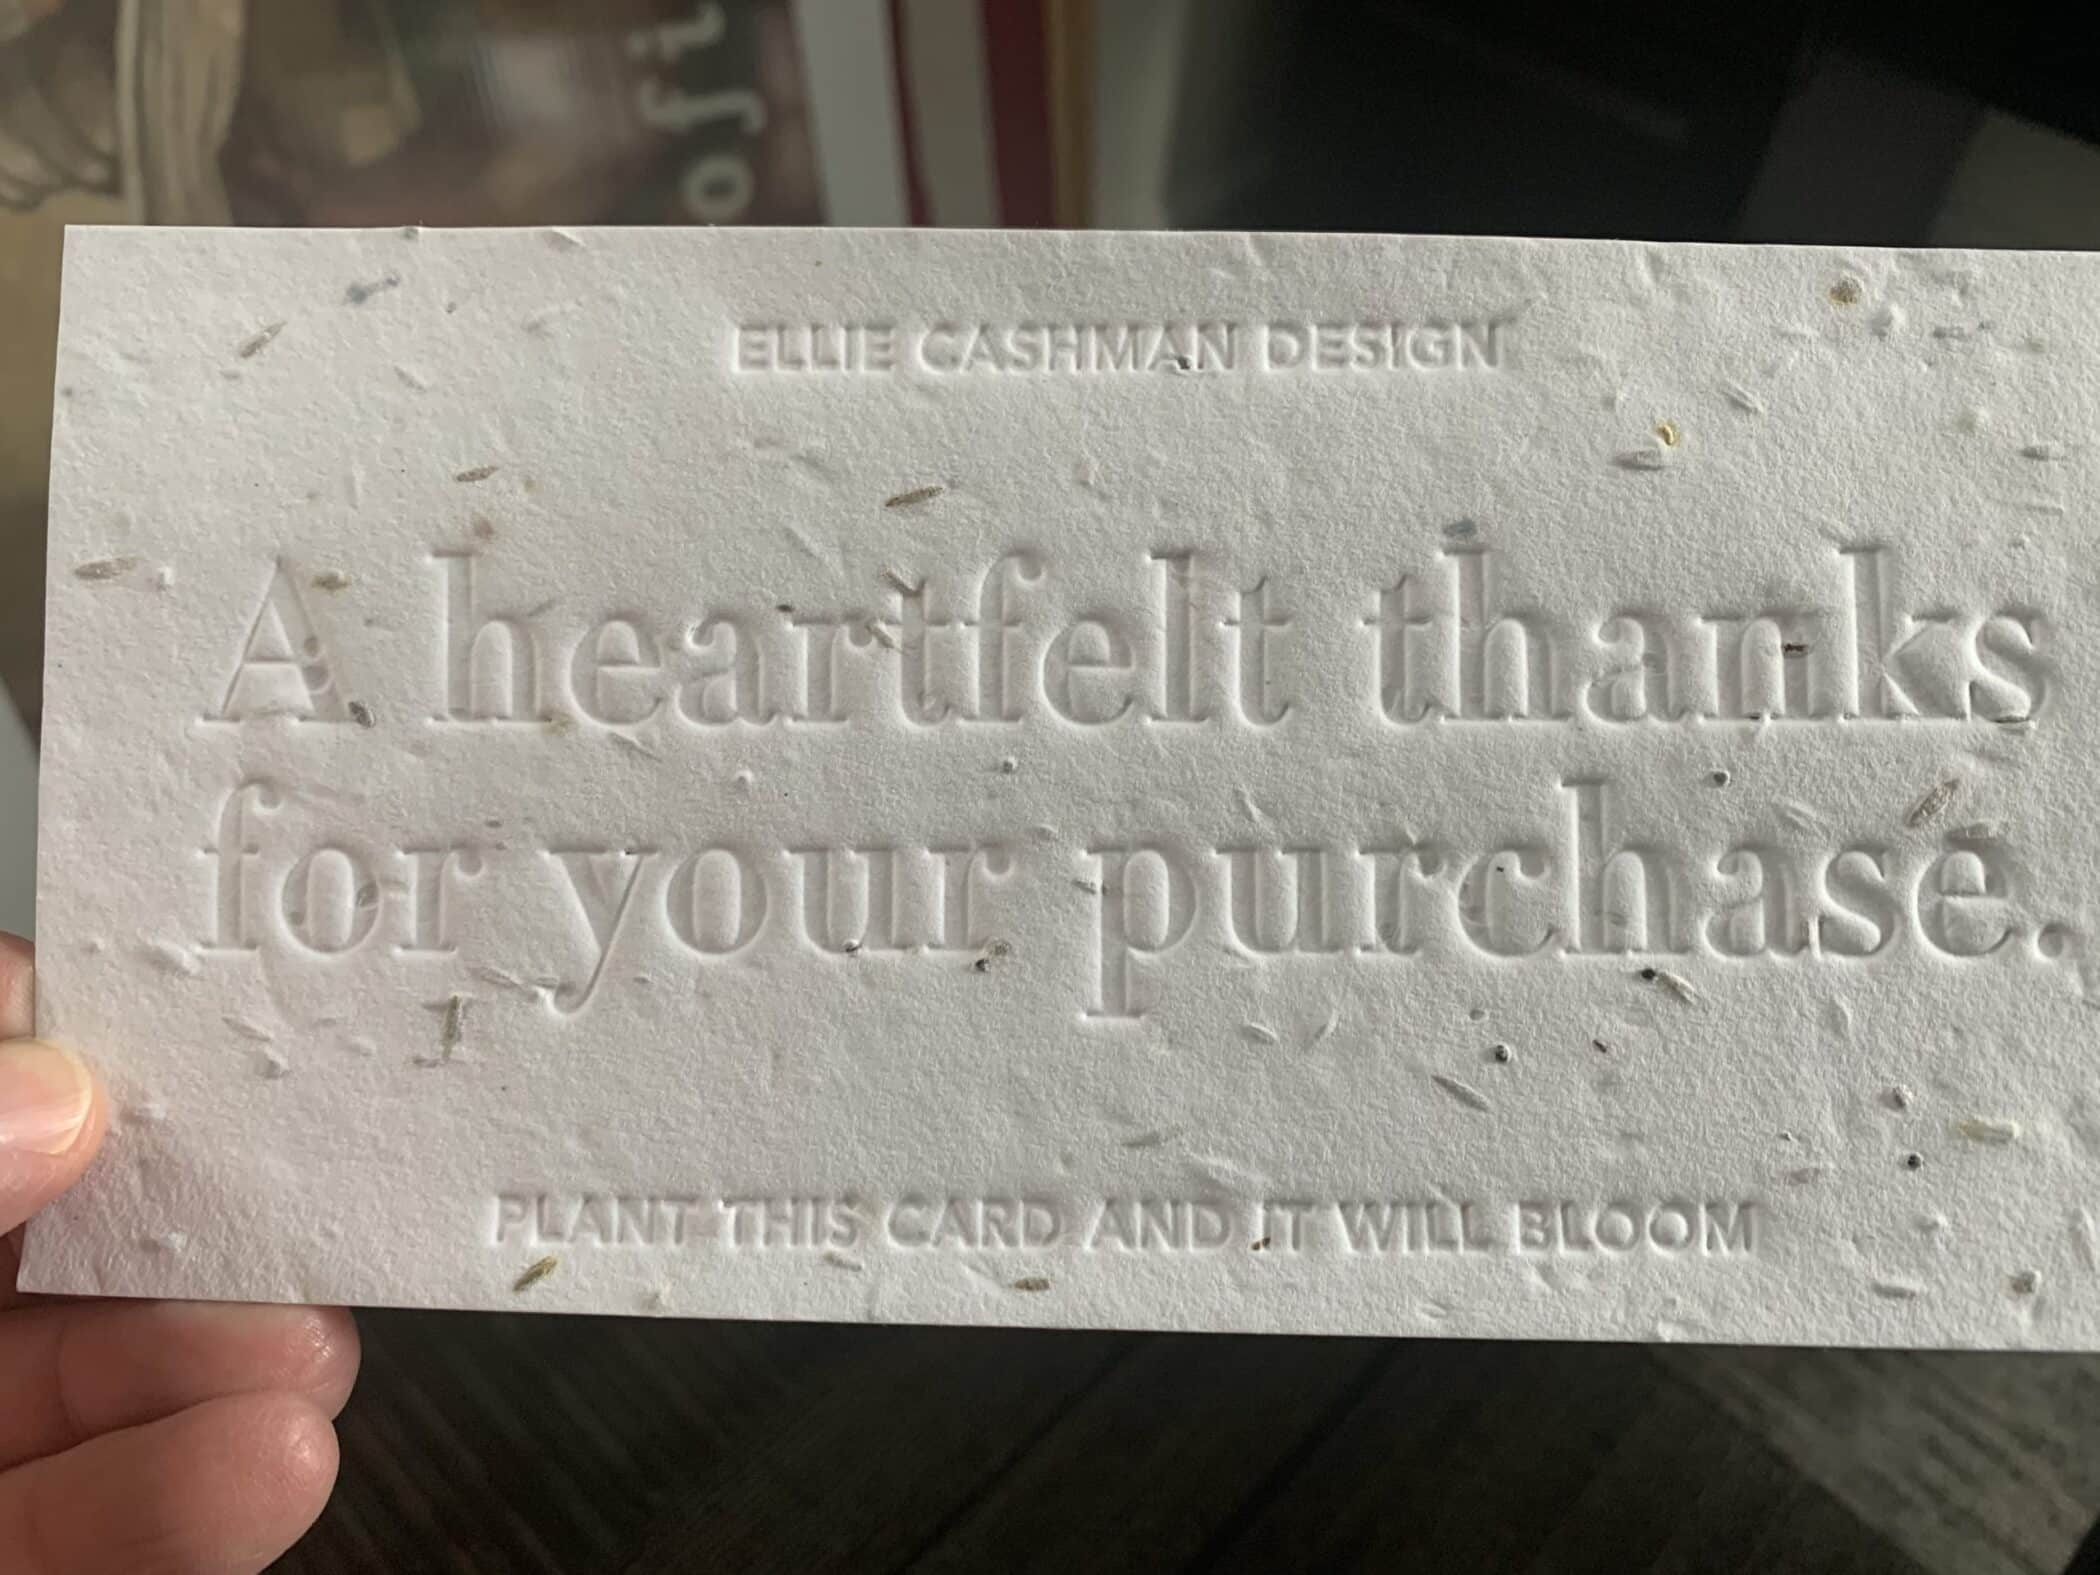 Ellie Cashman Design thanks for your purchase card